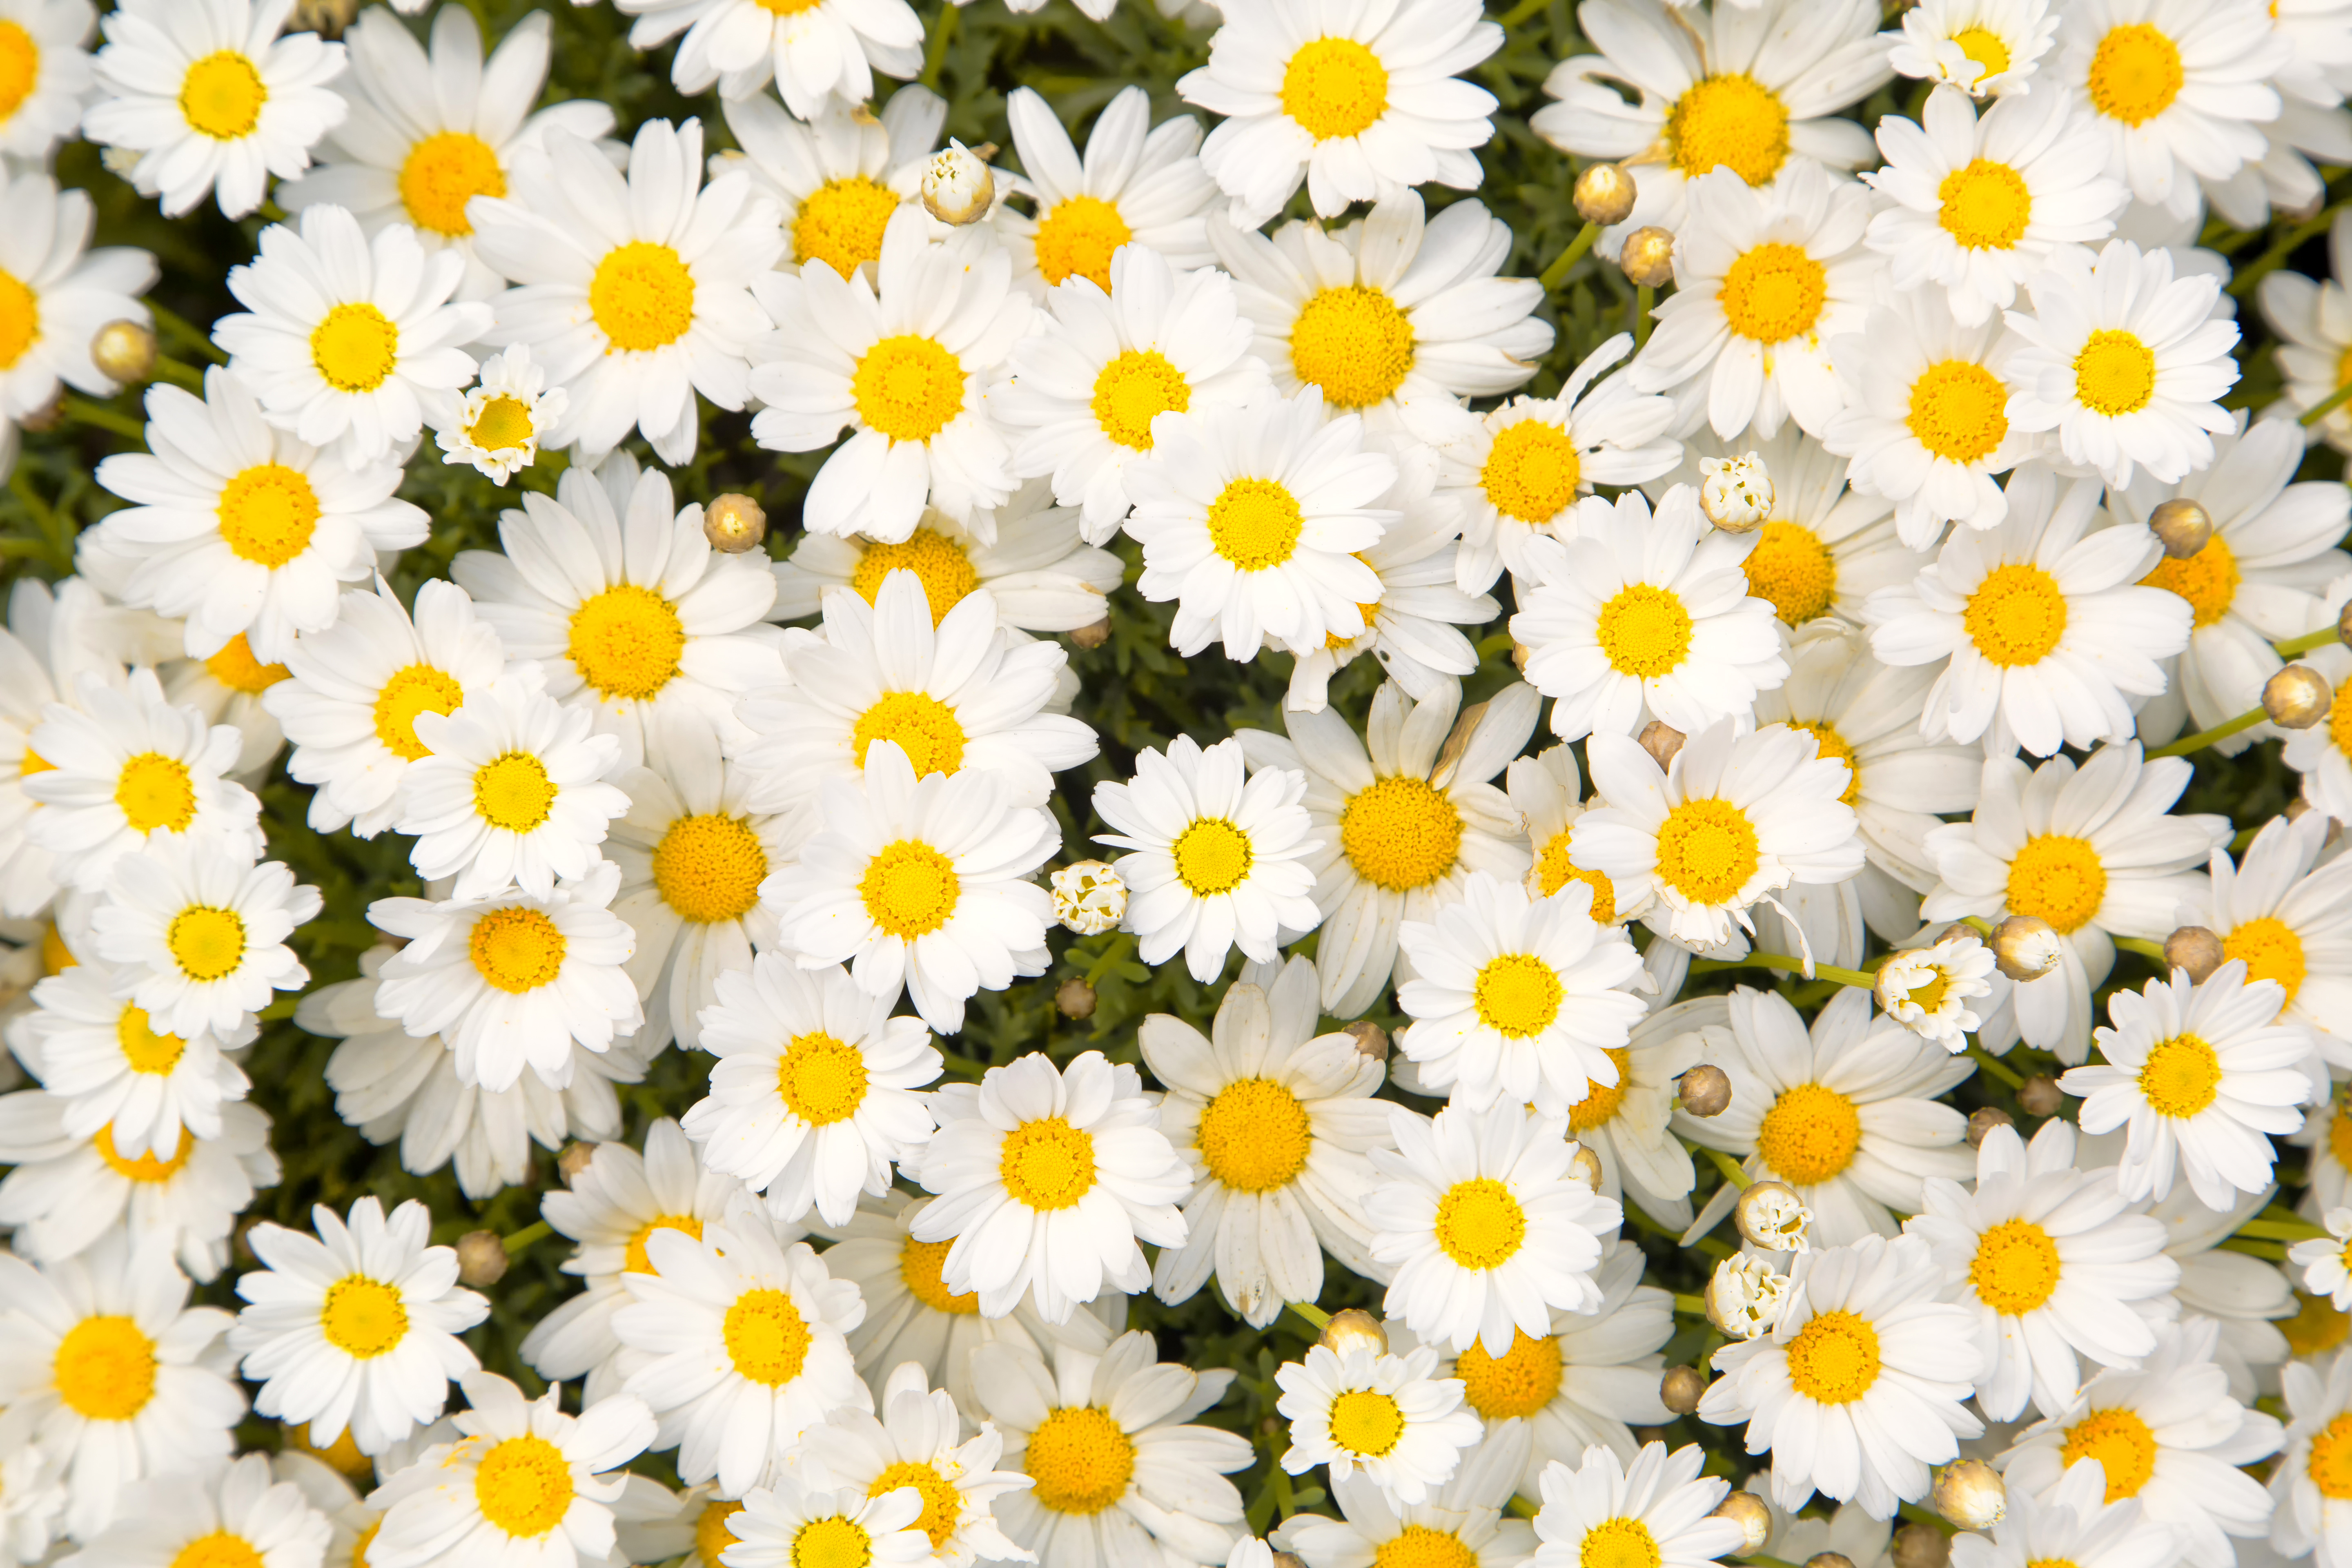 Daisy HD Wallpapers and Backgrounds. 